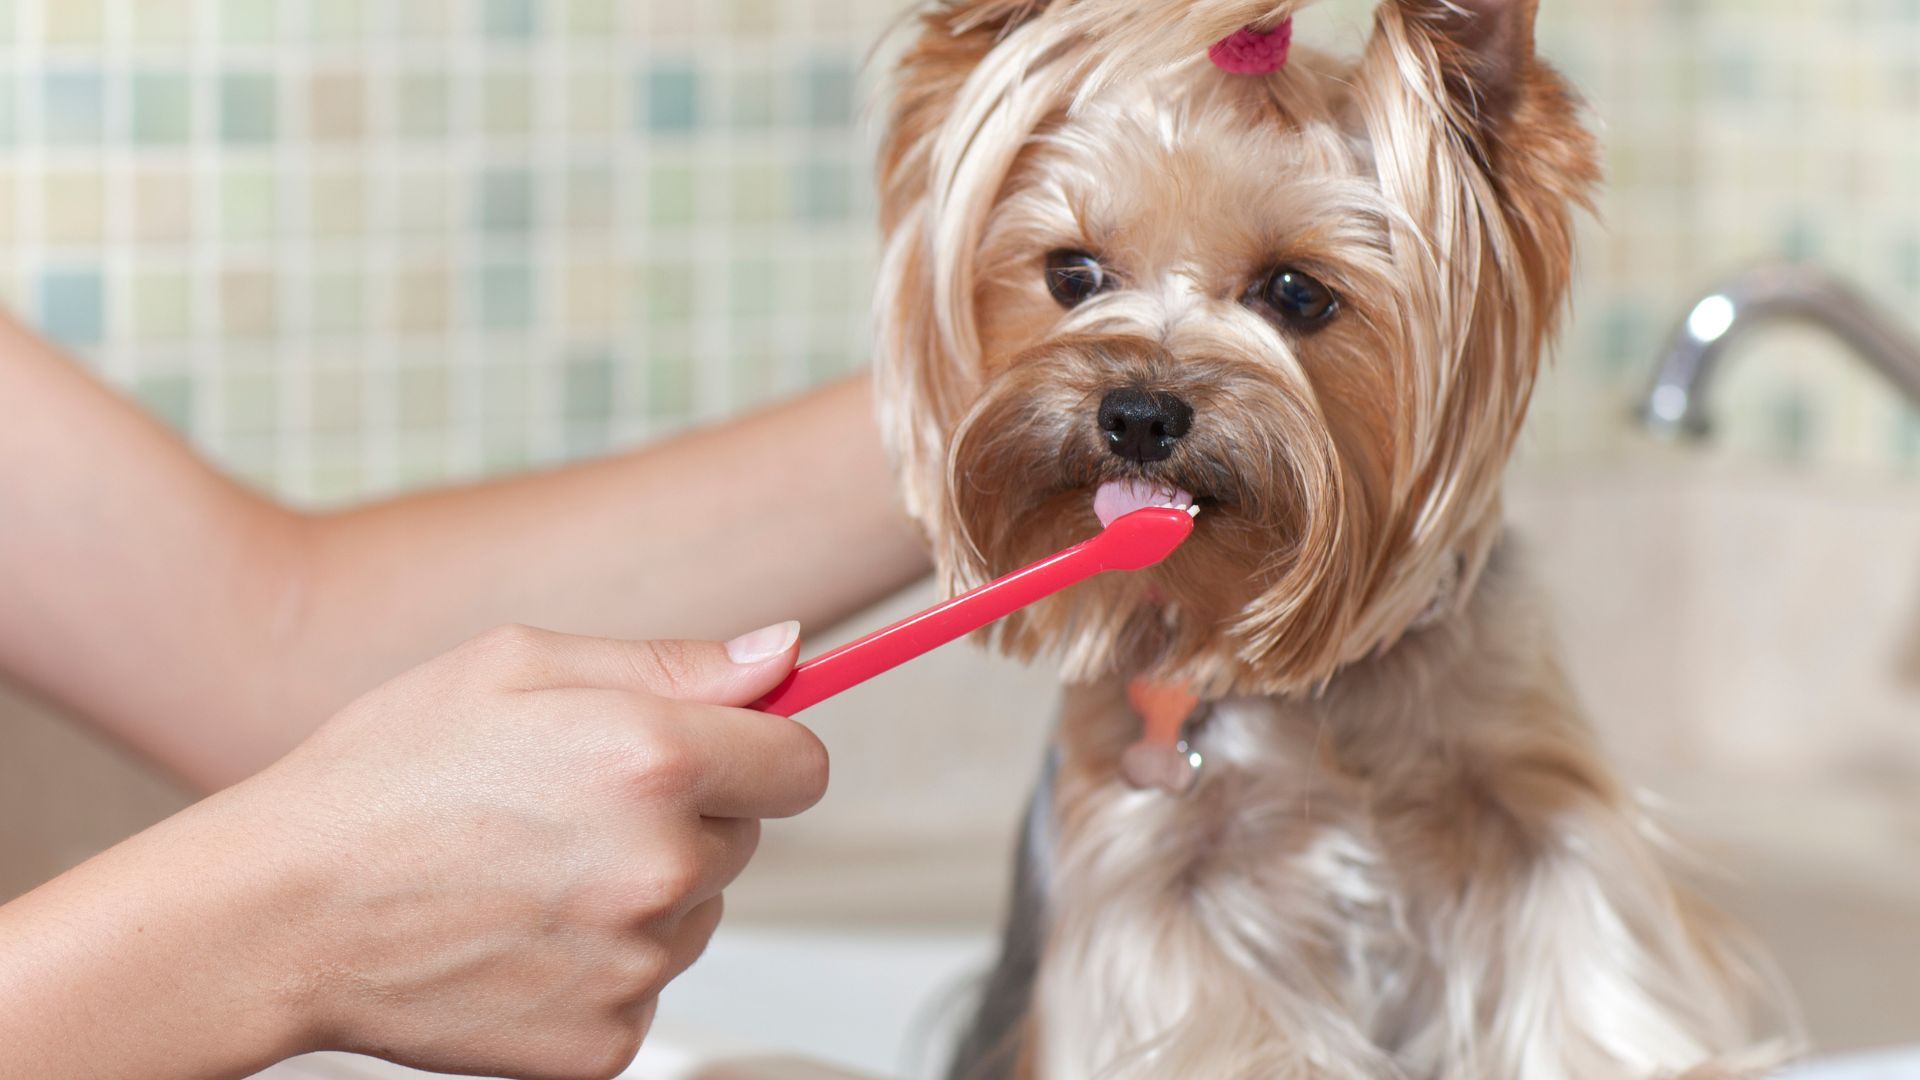 how to brush dog teeth when they refuse, dog's teeth, dog teeth, dental treats, dogs teeth, dog's mouth, dog toothpaste, teeth brushing, dental chews, pet's teeth, dental disease, a few teeth, baking soda, dog toothbrush, natural slow cleaning, dog tooth brushing, dog owners